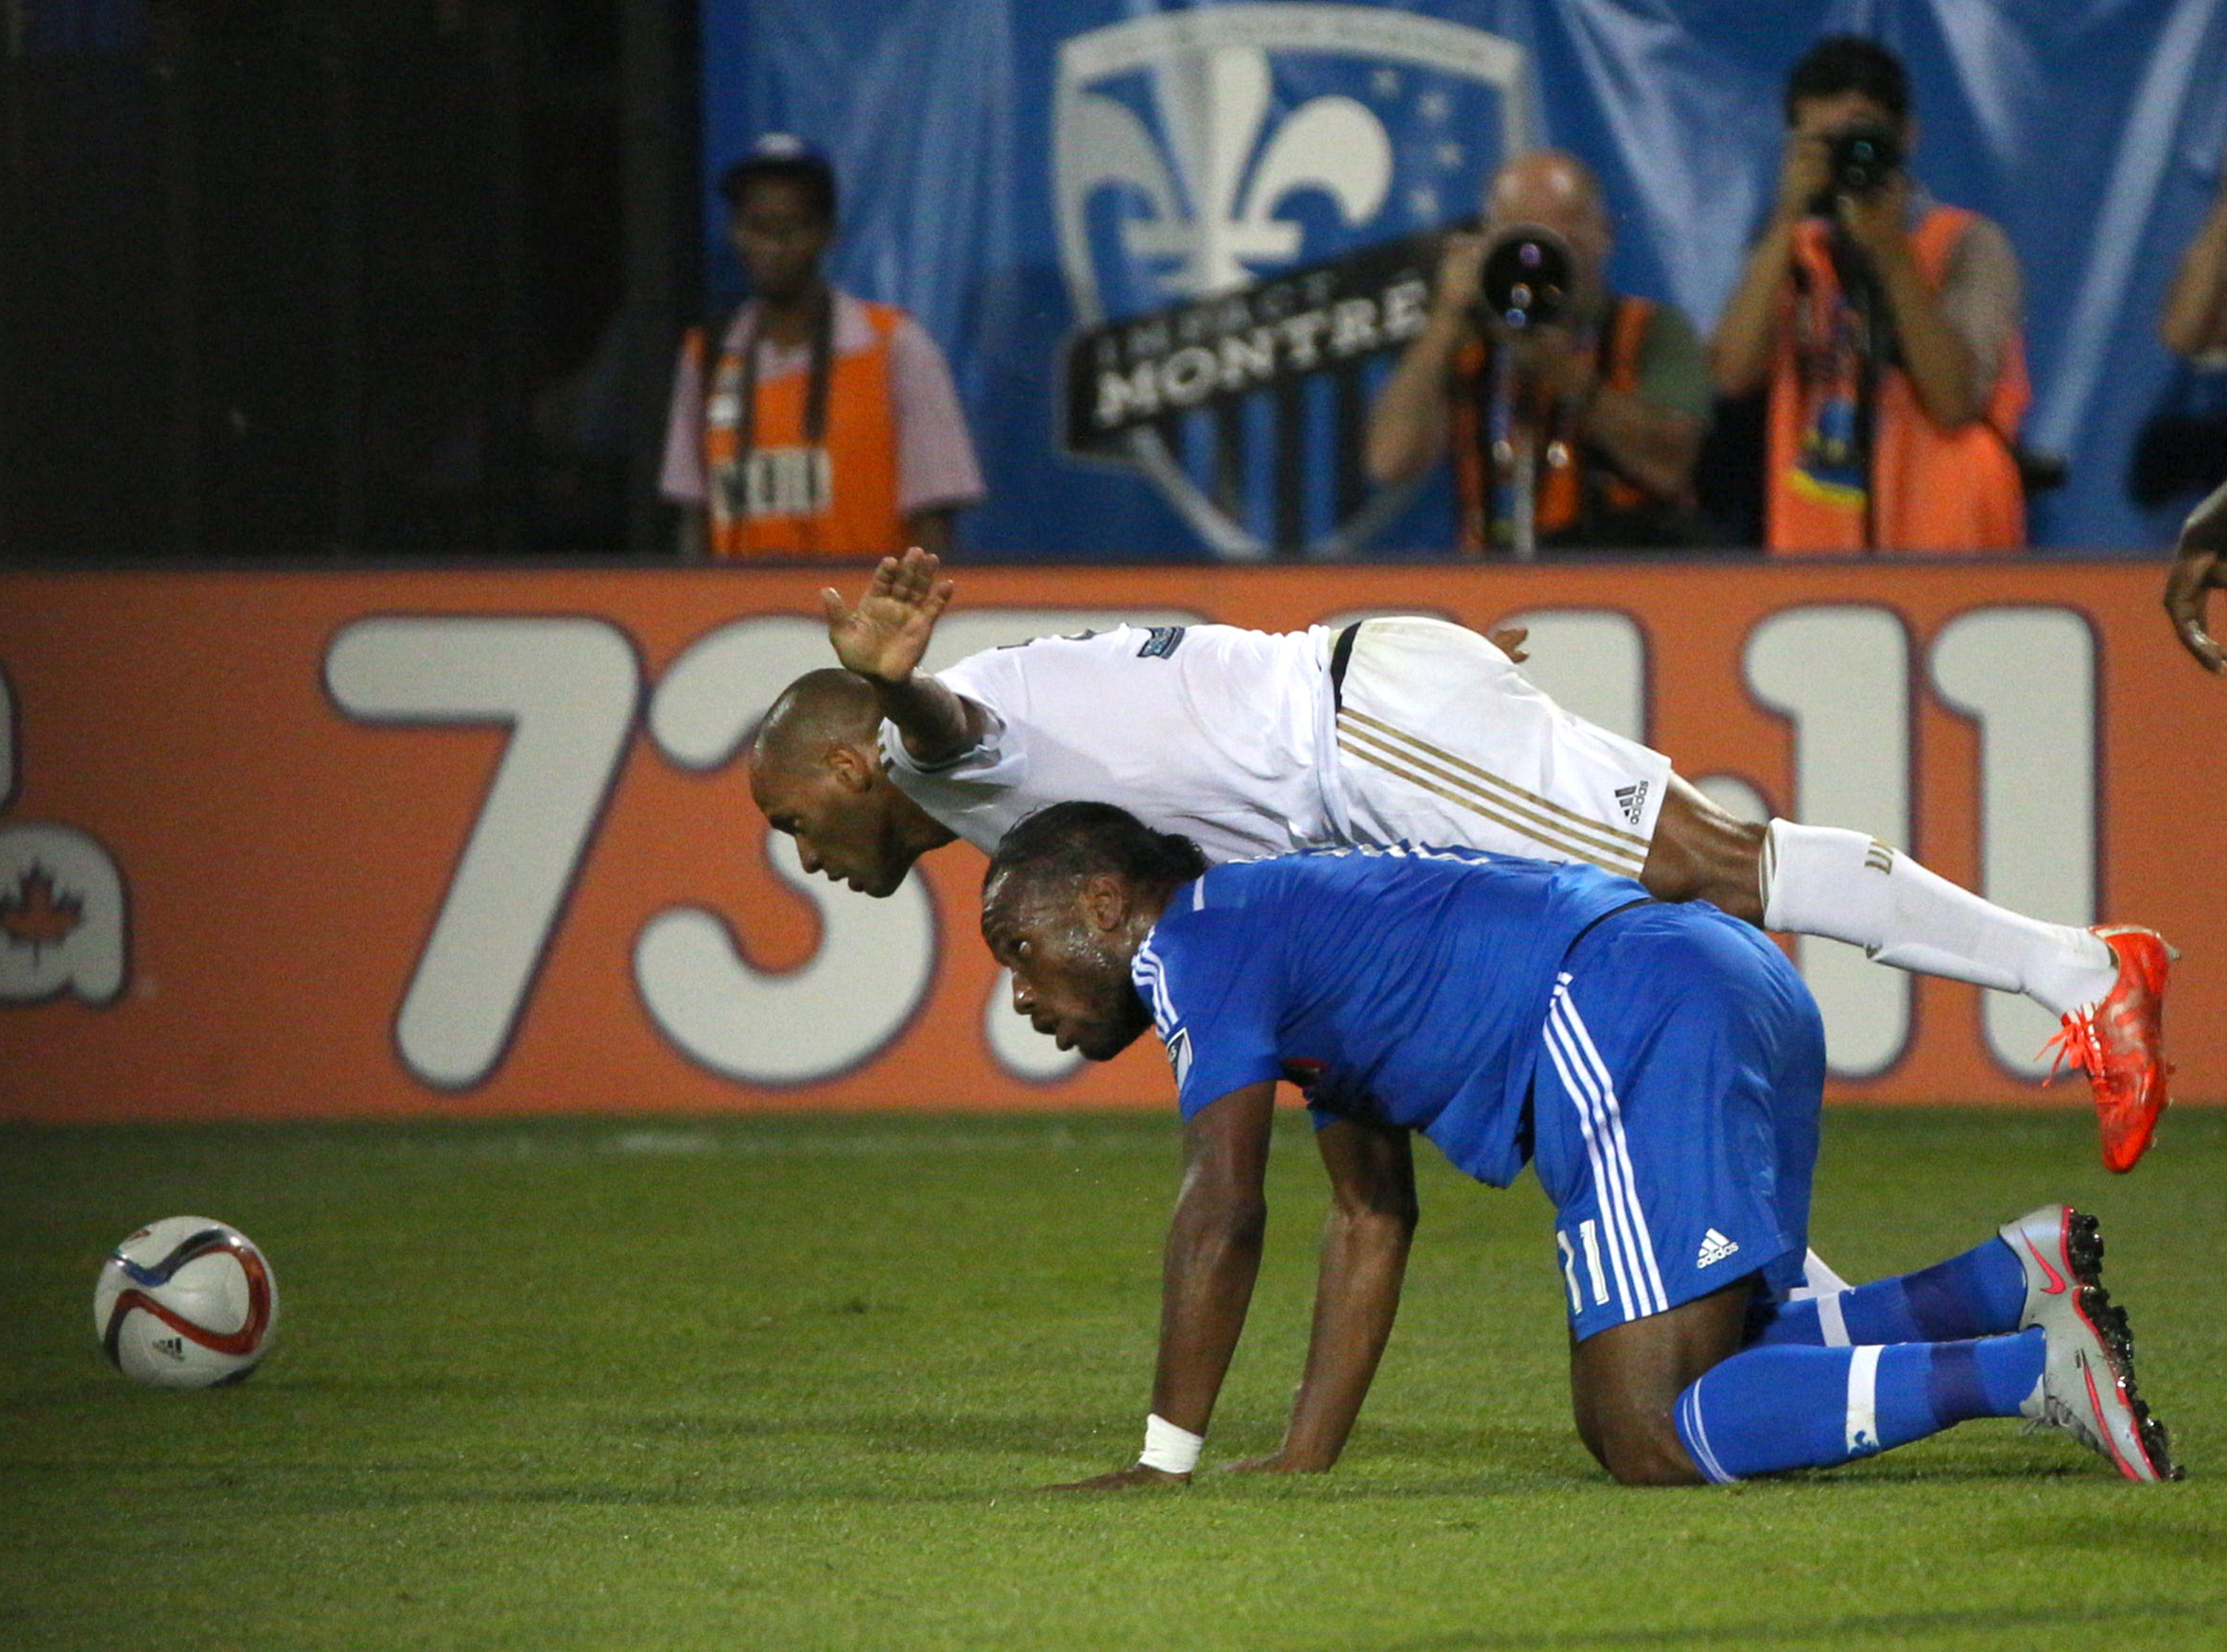 Drogba is fouled on a play in the second half of Saturday's 1-0 defeat to the Union.